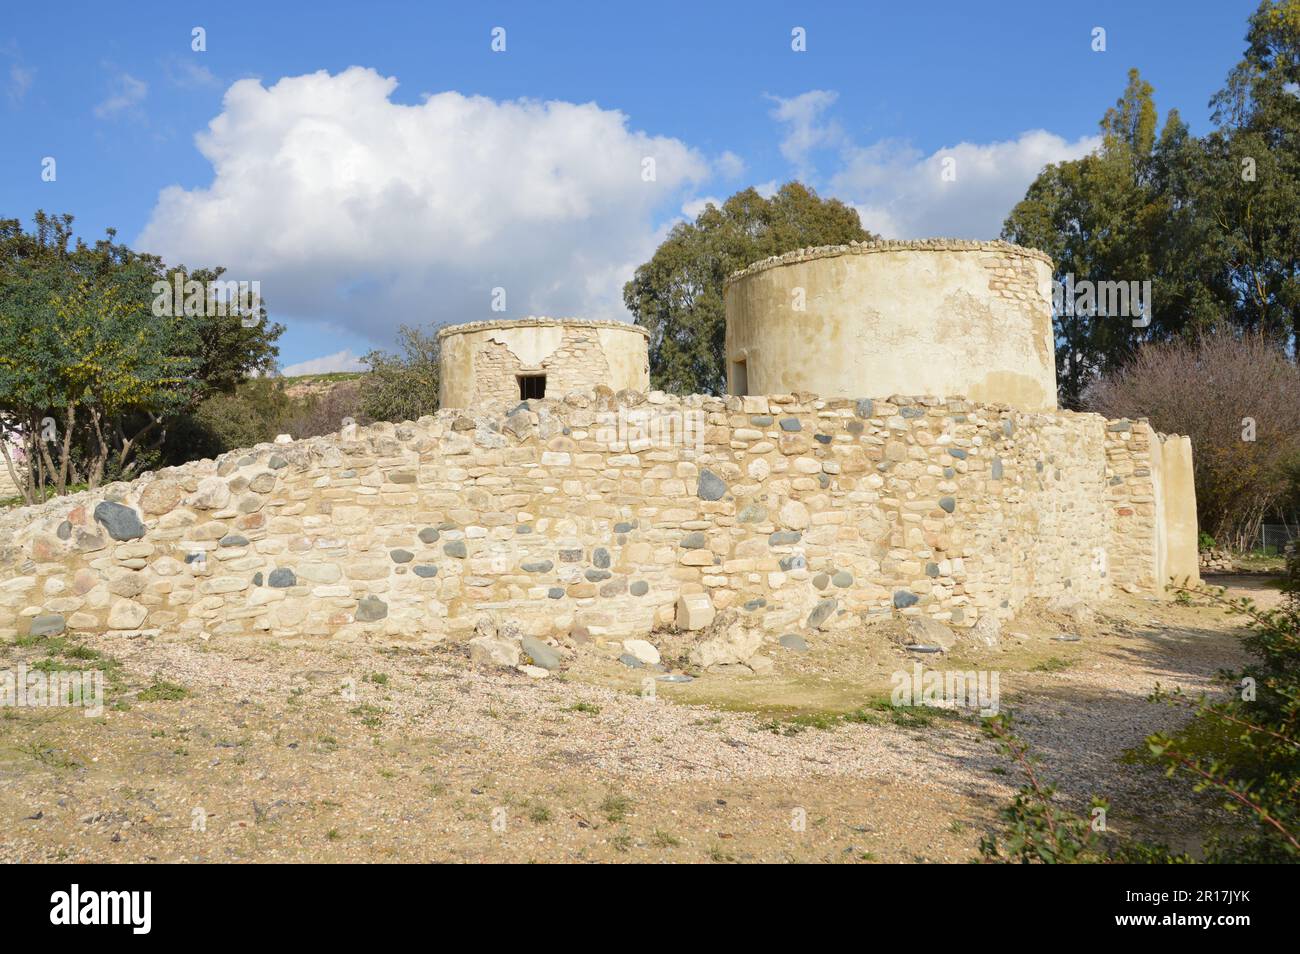 Cyprus, Khirokitia-Vouni (Choirokoitia) aceramic Neolithic site, a settlement dating from approximately 6800 BC, in process of ongoing excavation.  Th Stock Photo